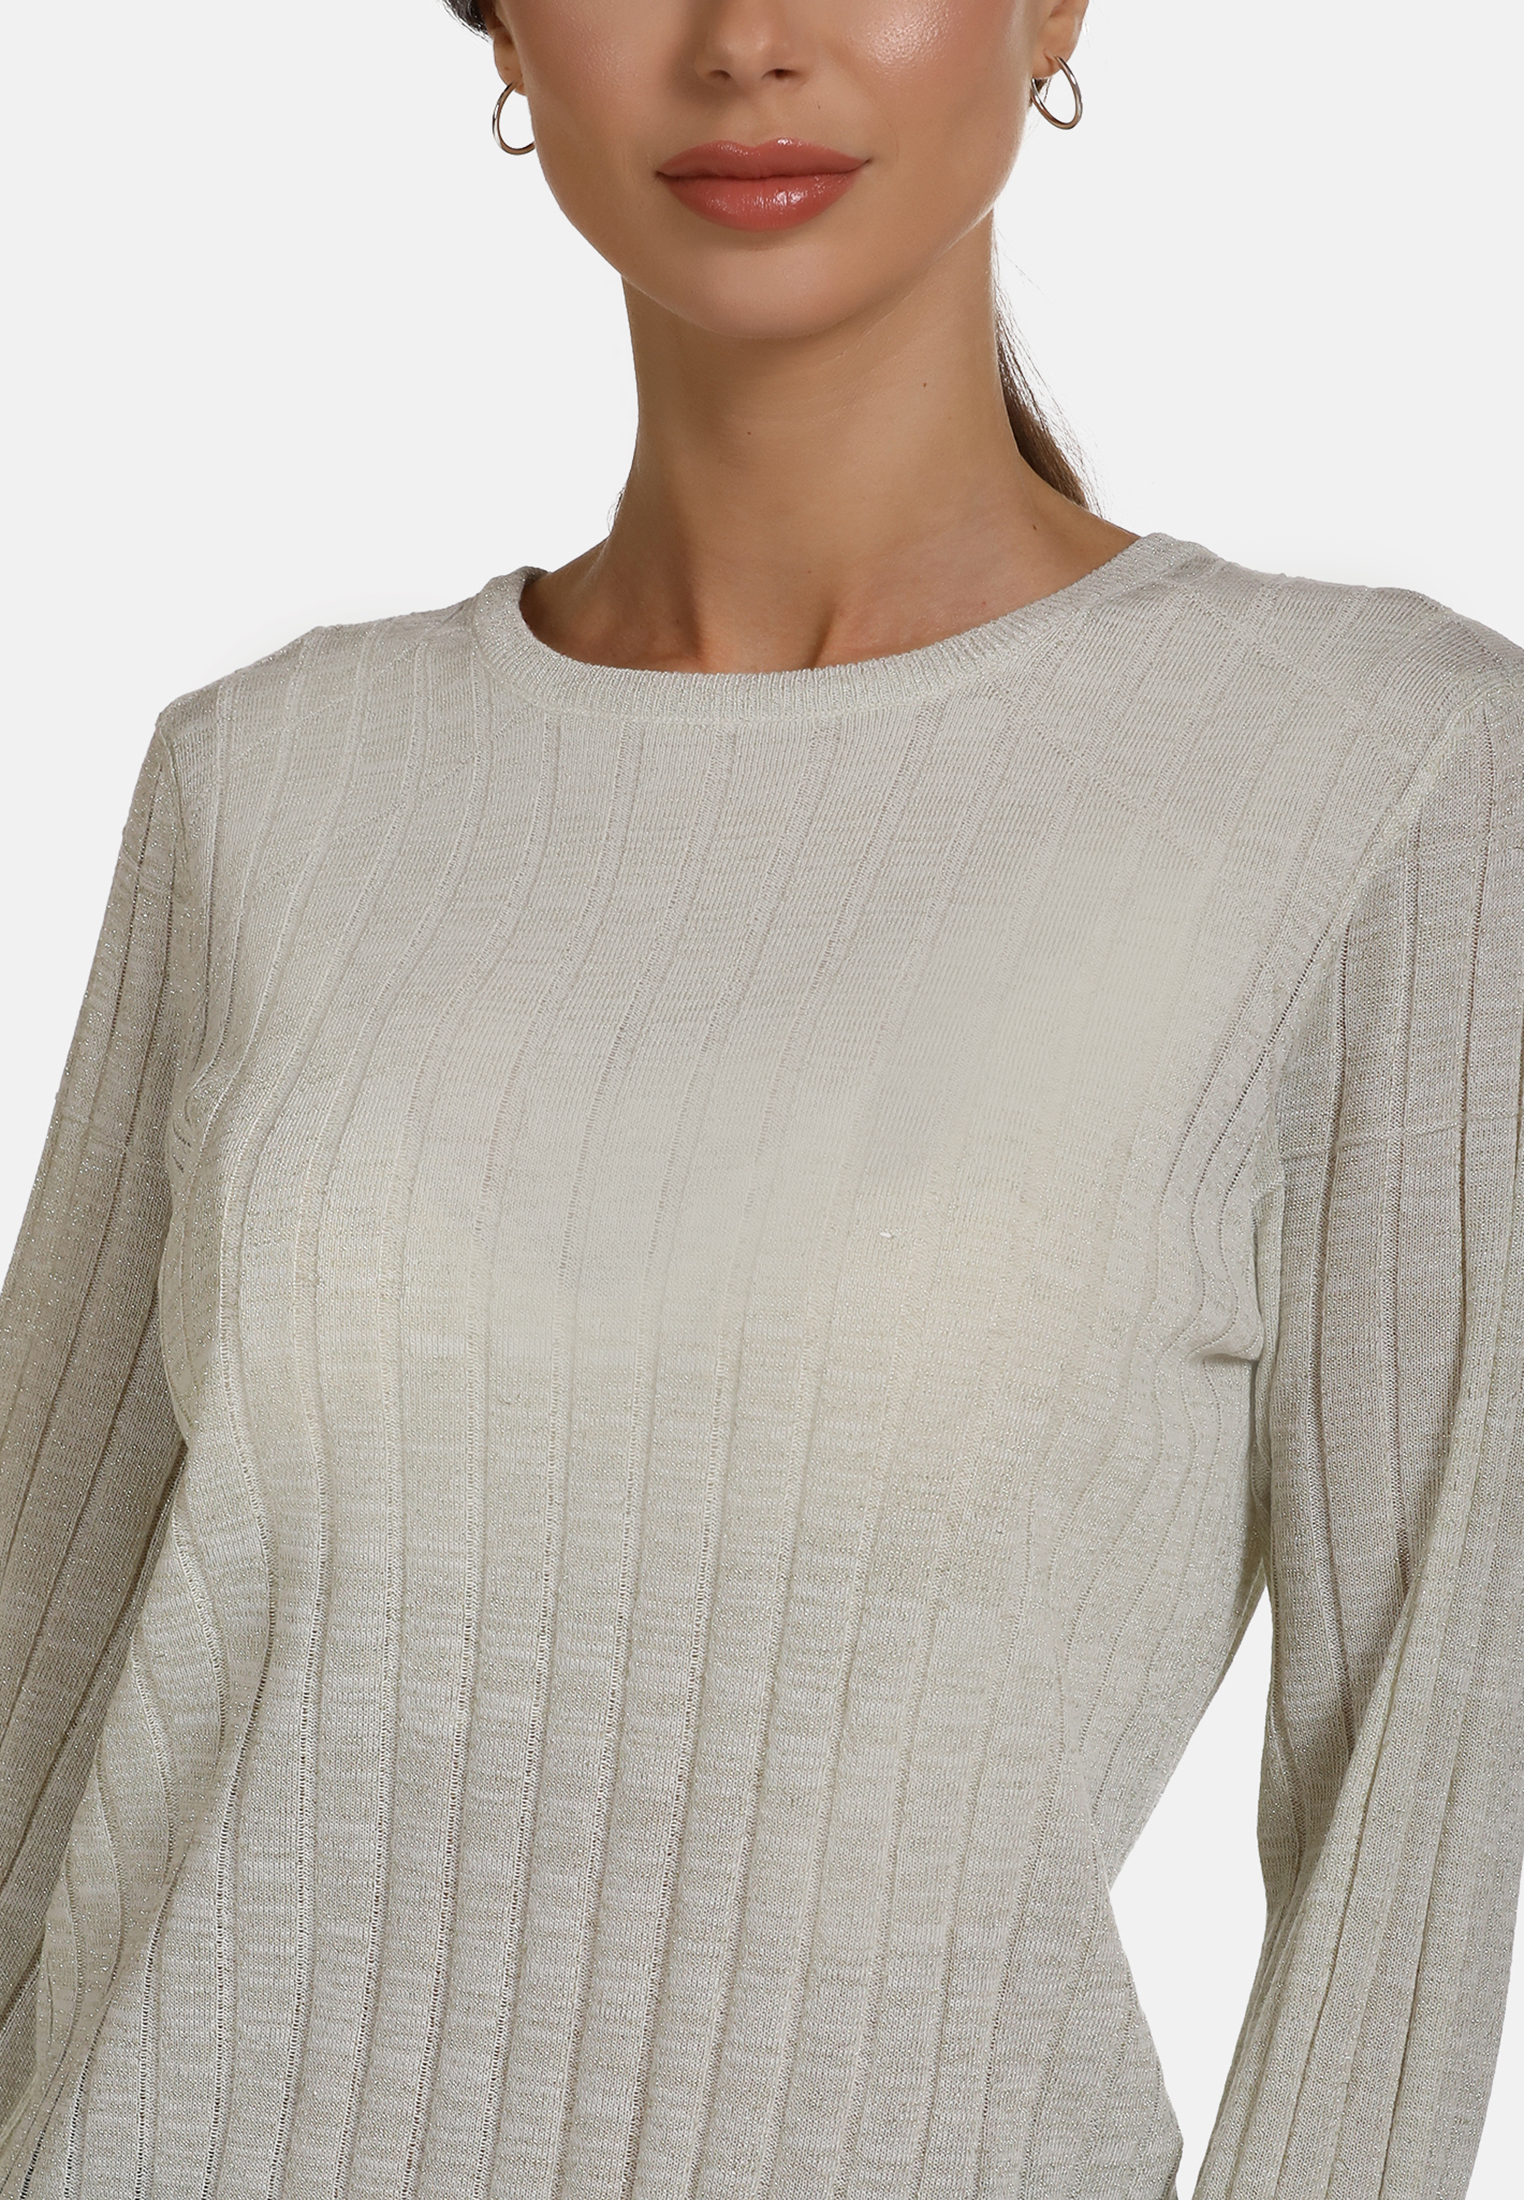 7qcYQ Donna faina Pullover in Bianco Naturale 